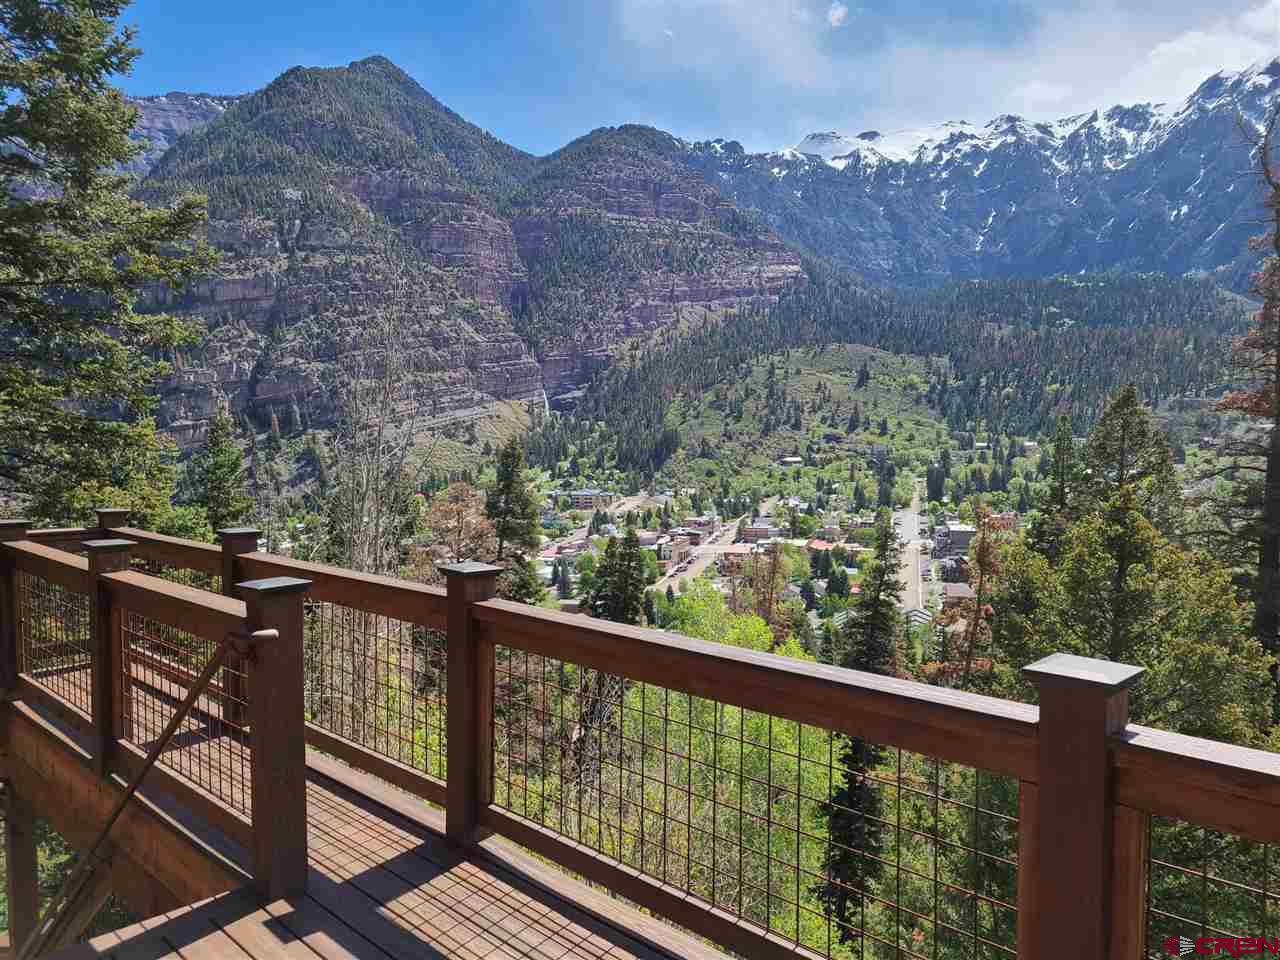 The most fabulous views above Ouray and complete privacy! 4 acres bordering National Forest on two sides with a 6.4 acre green belt below the home. Walk inside to luxury! 3 bedrooms, one with bunks, 4 full bathrooms, stone fireplace with crystals, deck looking out over Ouray and surrounding mountains, hot tub on lower patio, and a charming gas firepit on the side of the hill. Comes completely furnished - bring your toothbrush.  Stunning views in all directions are yours from this unique property! This three bedroom, four full bath home was completely renovated in 2010 with high end finishes and custom furniture throughout. The original wood burning fireplace remains and is constructed using local stones, geodes and crystals. The home is being sold completely furnished.   Stone patios surround the home and extend behind the house to an outdoor seating area with a gas fire pit and more incredible views. The large hot tub in front of the home has impressive views to the town below and the mountains beyond where you often see the alpenglow at sunset.  Windows are present in every room and bathroom of the home to take in natural light and to enjoy the views from every location. A new deck was installed in 2018 that provides for easy outdoor entertaining or just relaxing with family and friends.   The home sits on 4 acres and is protected on all sides for complete privacy. Oak Creek forms the southern boundary, national forest surrounds it to the west and north, and the east side is adjacent to a 6.4 acre green belt conservation easement between the home and the town of Ouray. A controlling interest in the green belt is also included in the price of this home. One of the access points to the Ouray Perimeter Trail is located on the greenbelt, just a few minutes walk from your front door. While you are still within walking distance to the town of Ouray and all that it offers, the home is located in the county and is not subject to city property taxes. This property is a rare gem and the views will take your breath away!